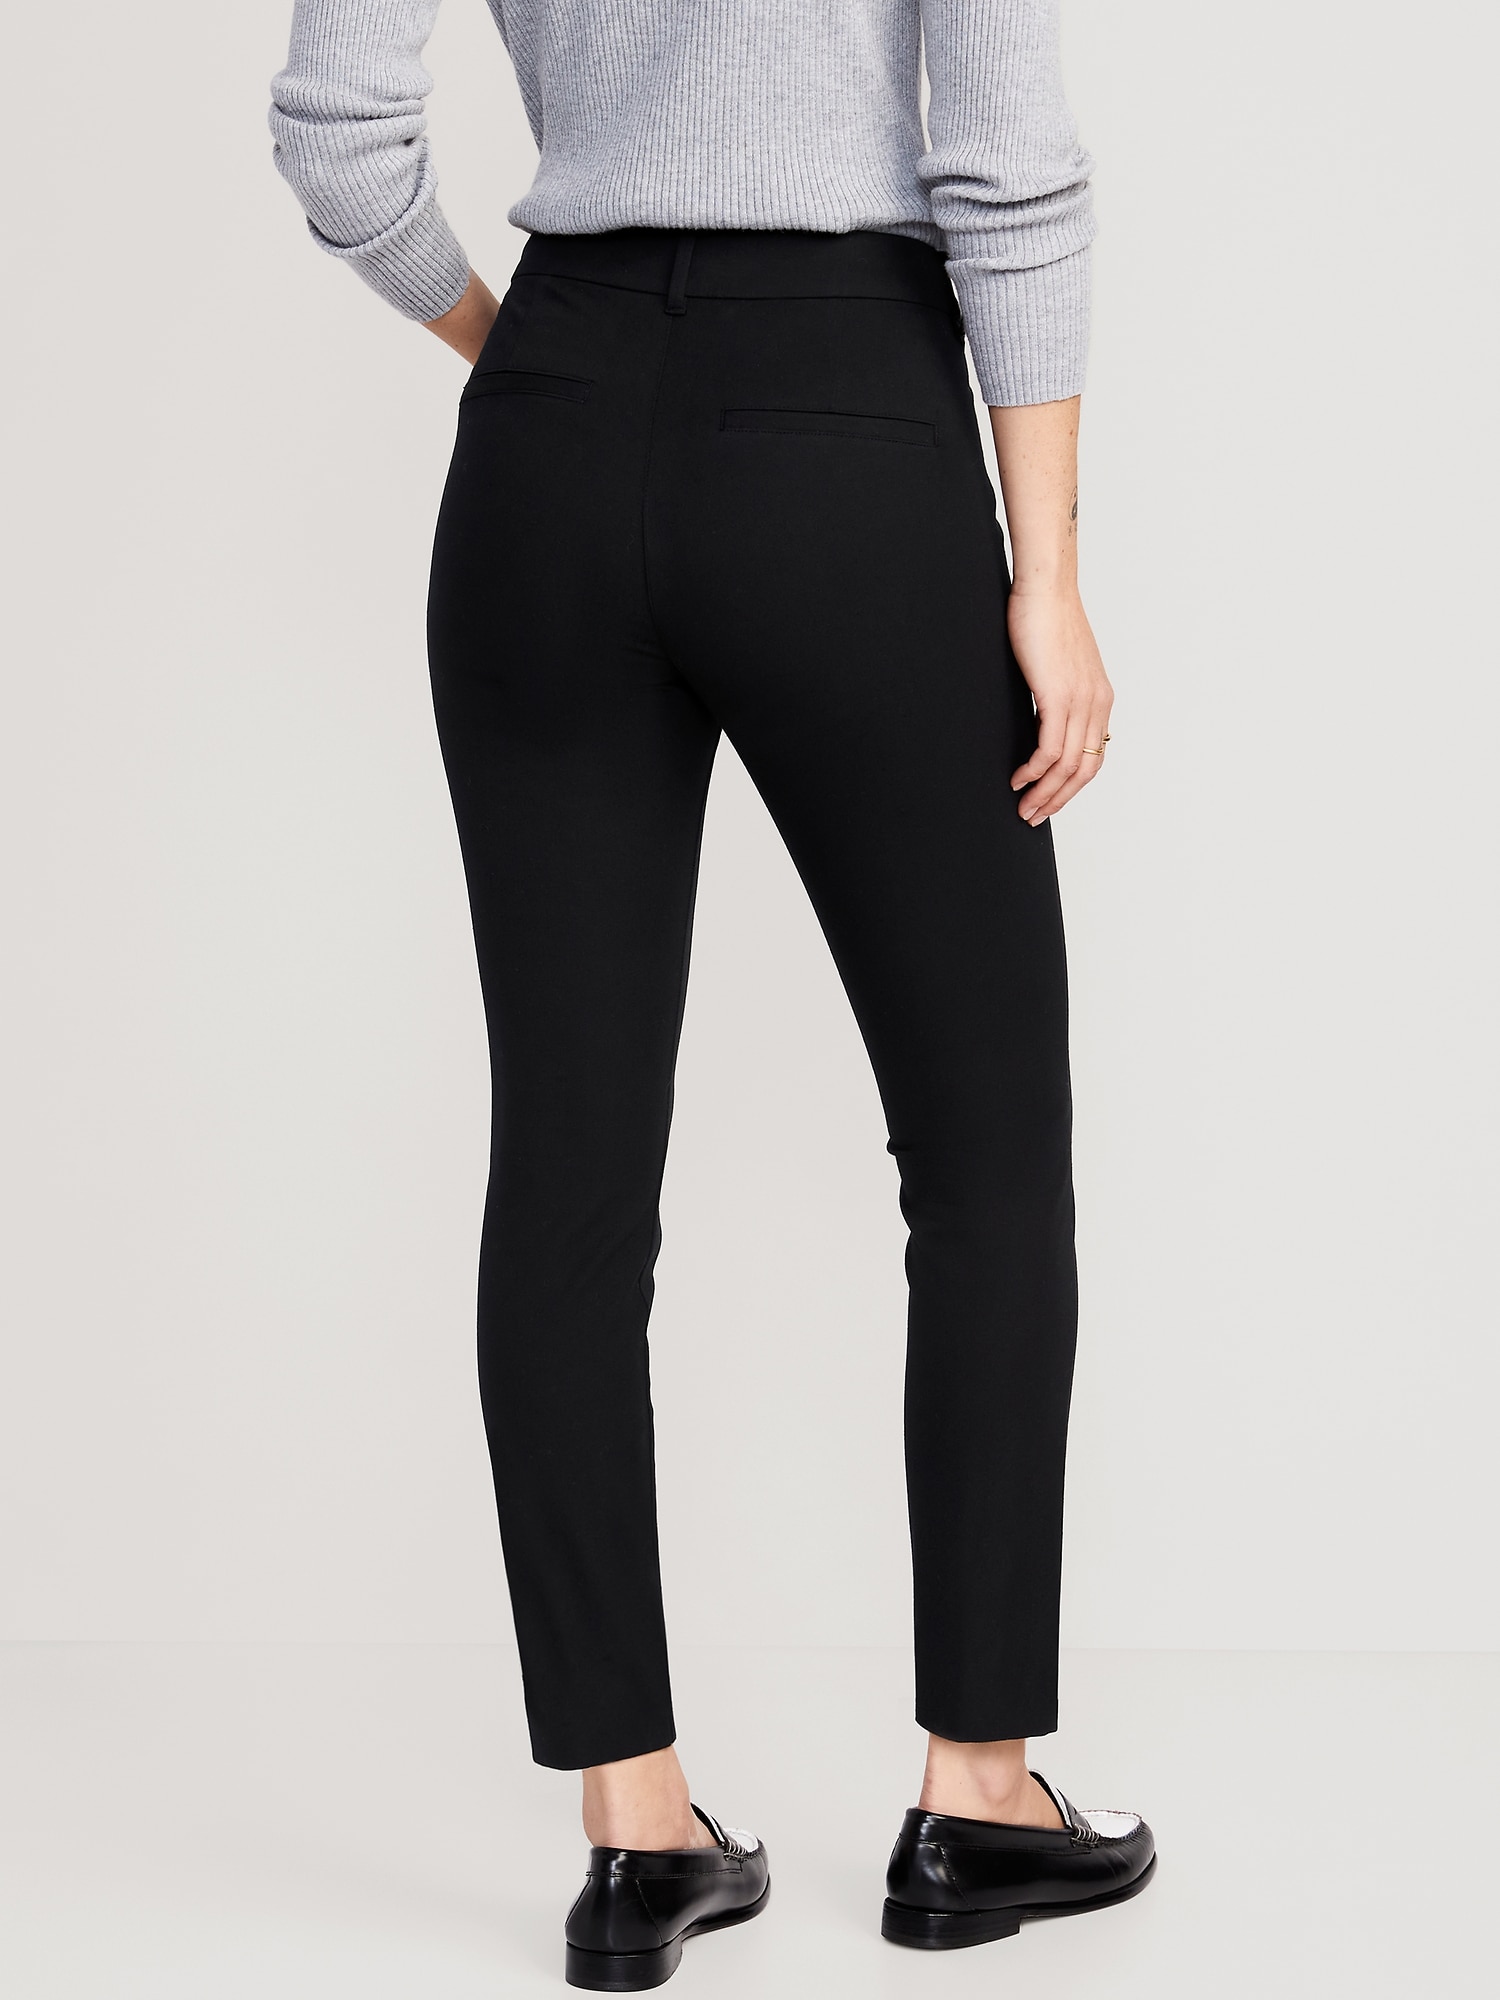 Mindy Petite 7/8 Slim Pants by Forever New Petite Online